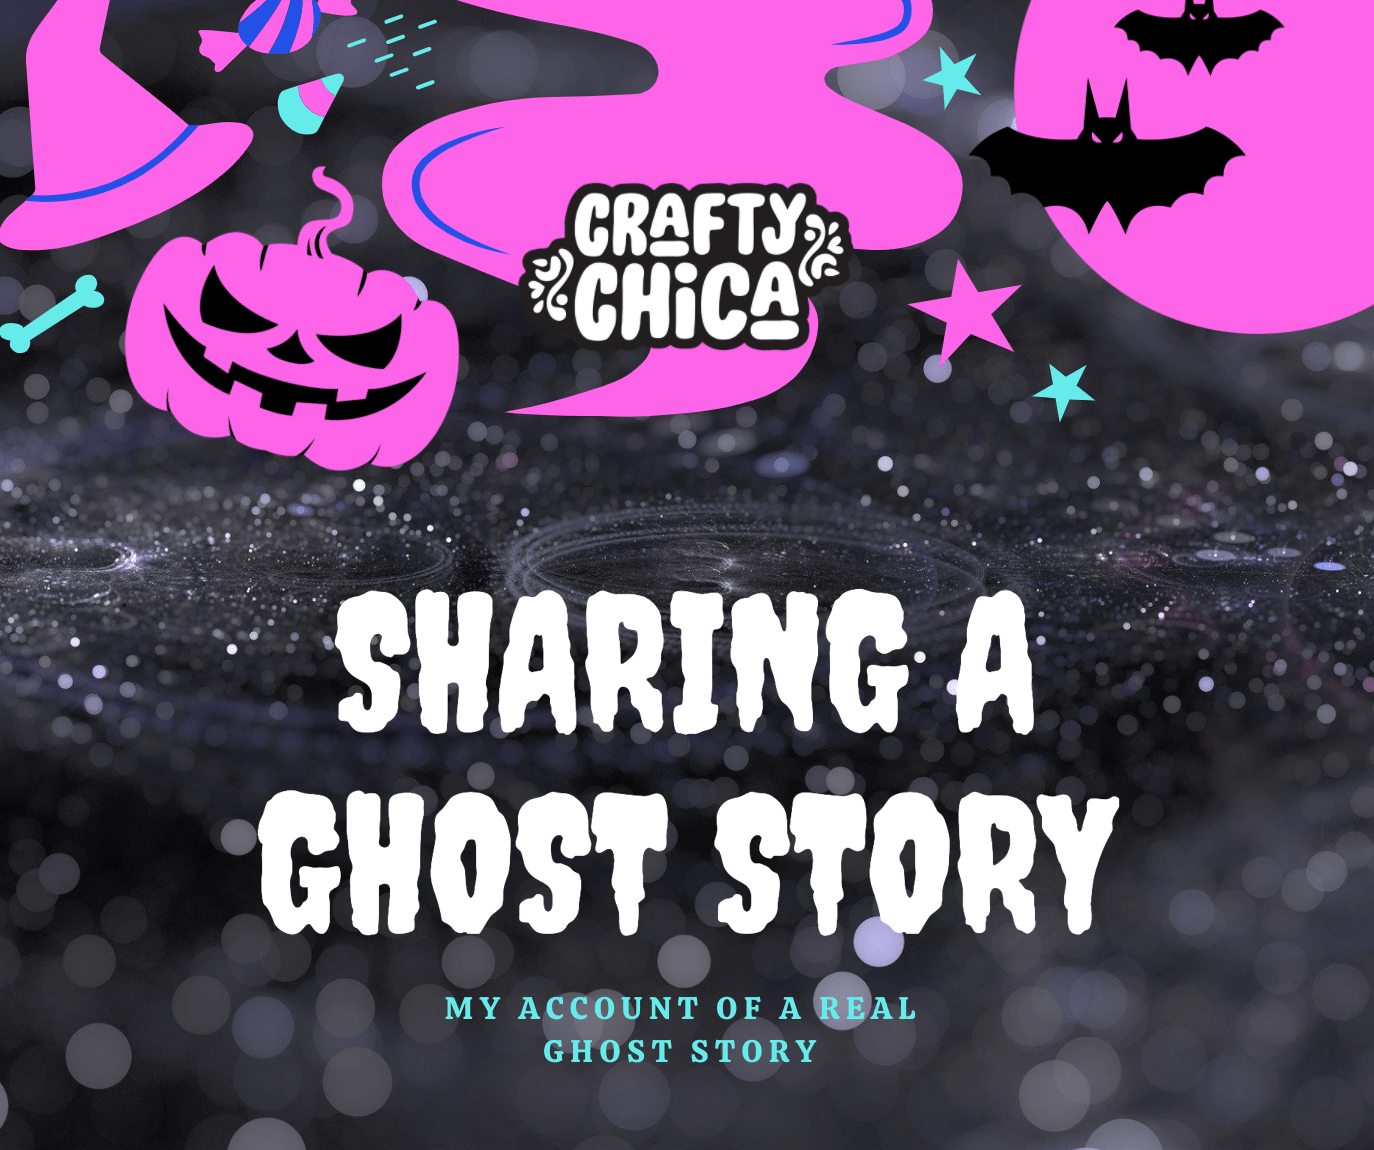 Sharing a Ghost Story on Craftychica.com